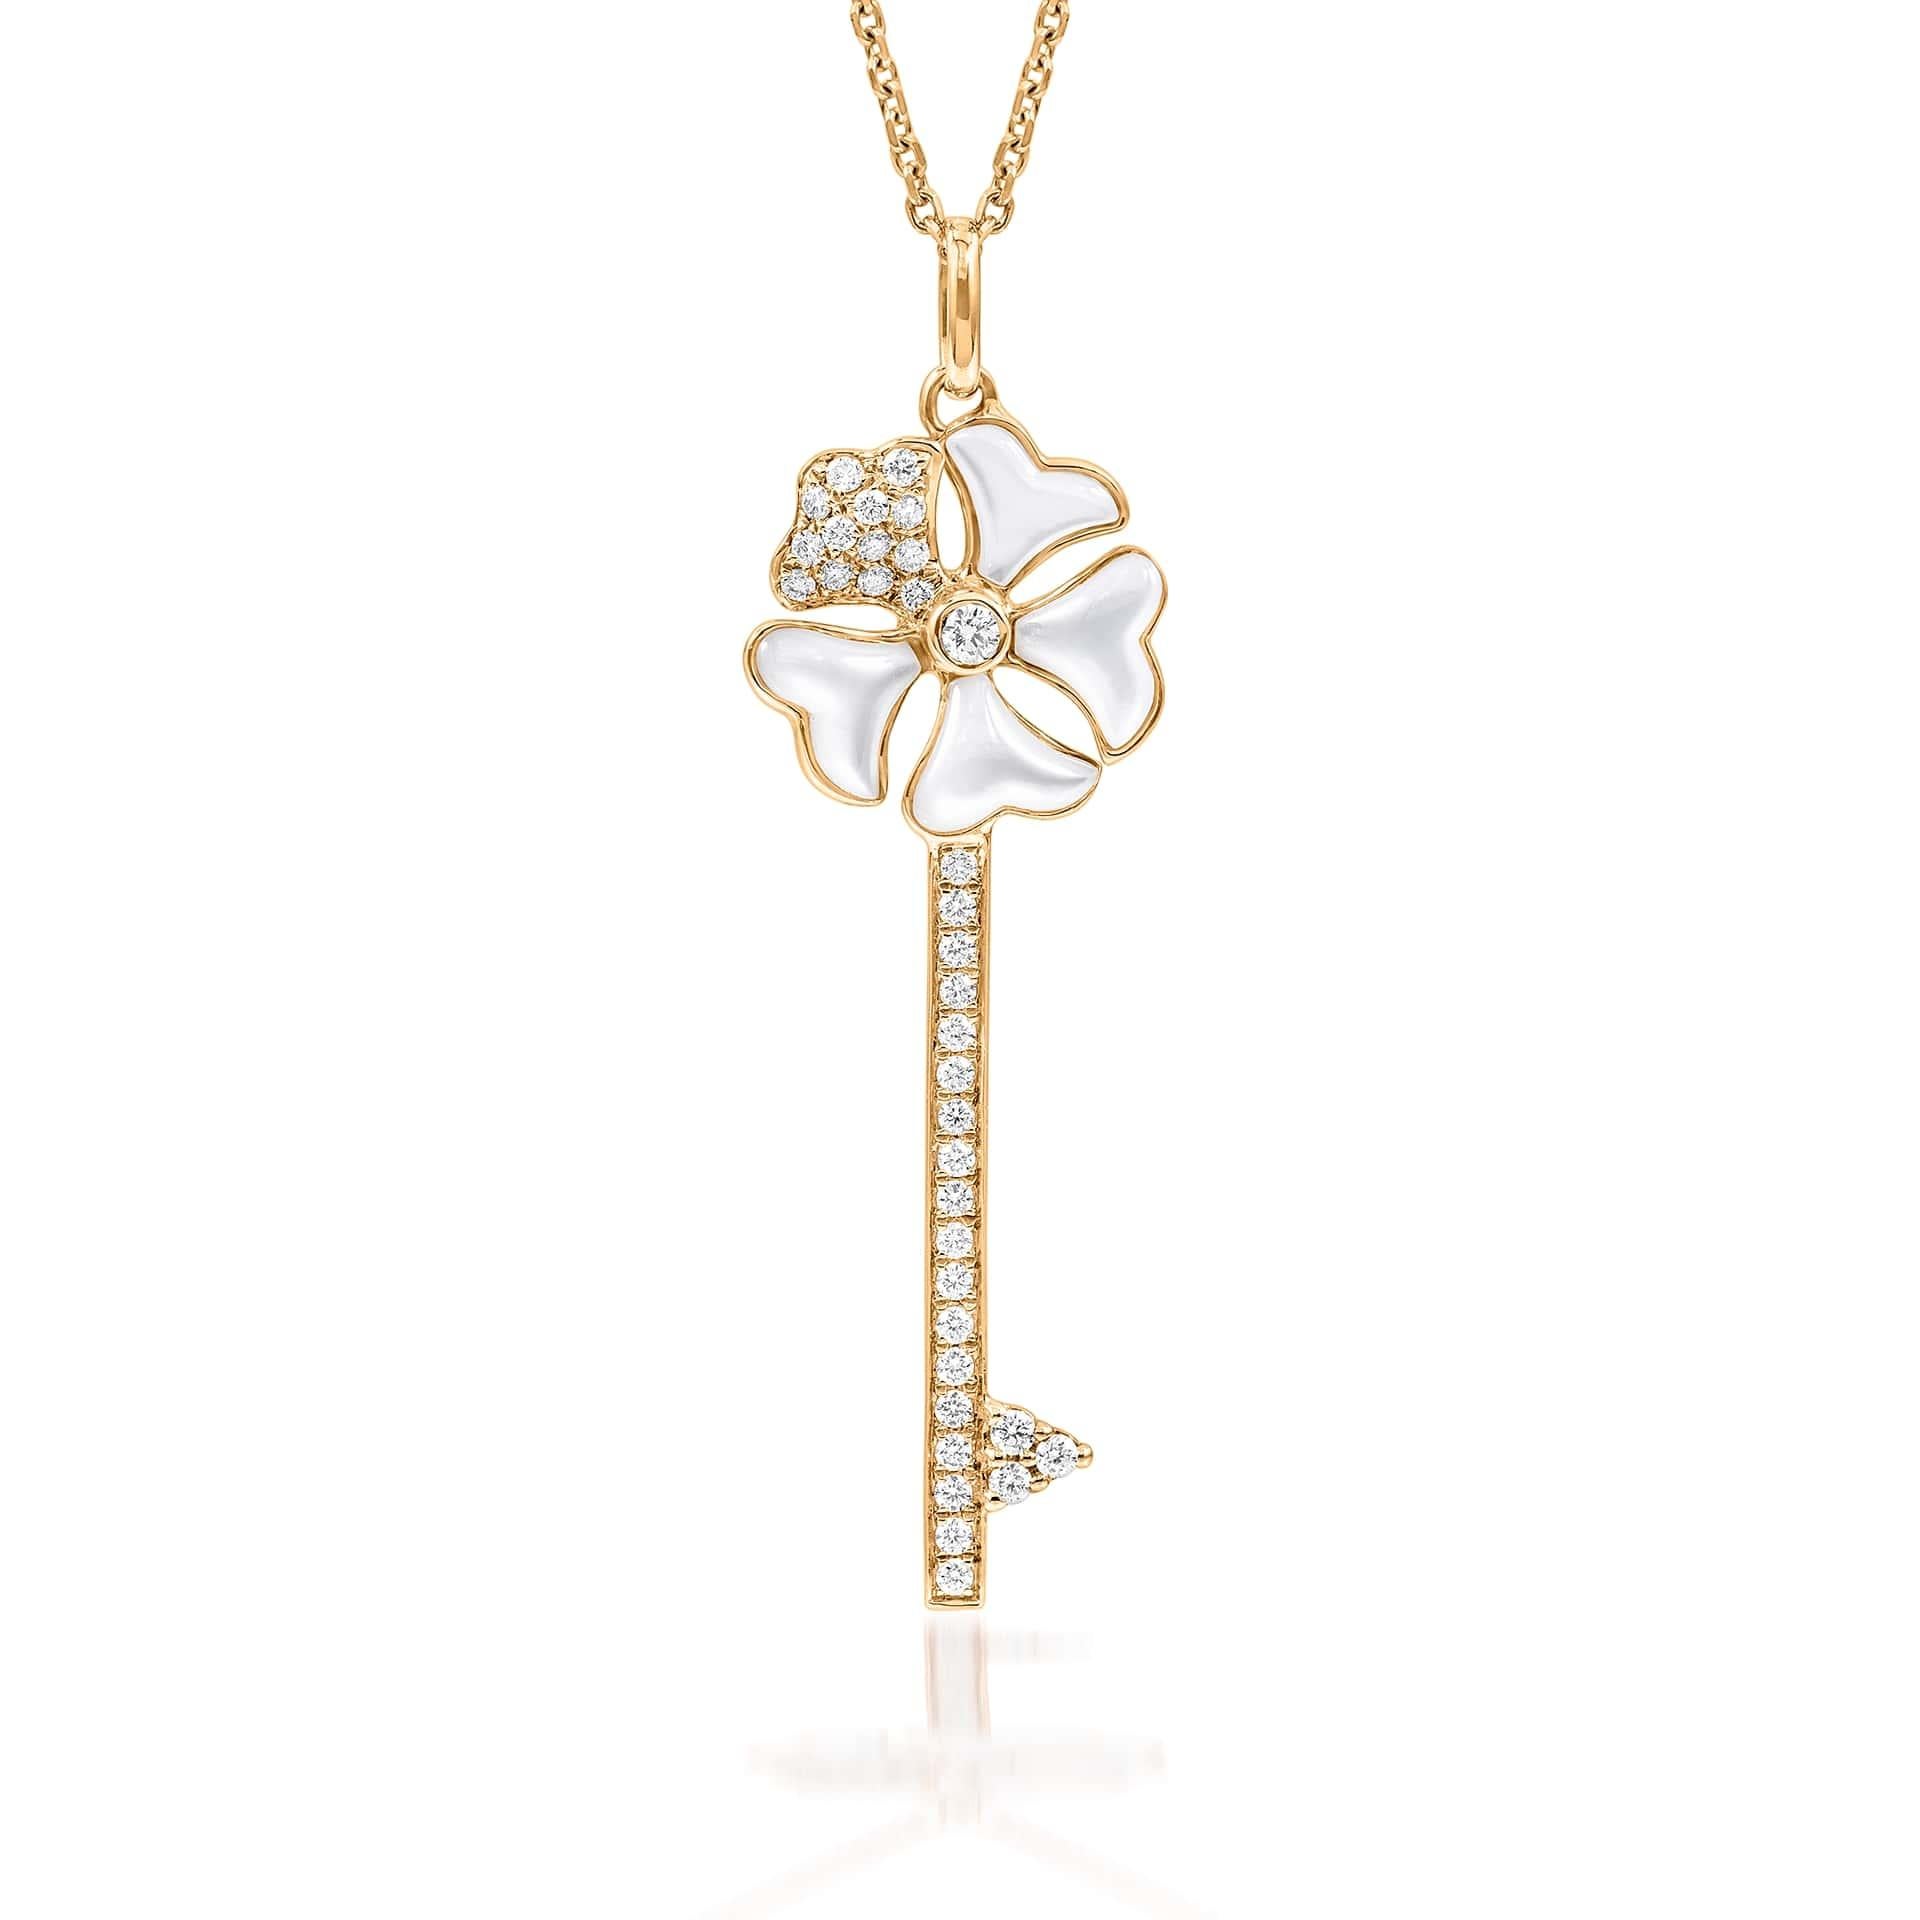 Bloom Diamond and Mother-of-Pearl Key Necklace in 18K Yellow Gold

Inspired by the exquisite petals of the alpine cinquefoil flower, the Bloom collection combines the richness of diamonds and precious metals with the light versatility of this